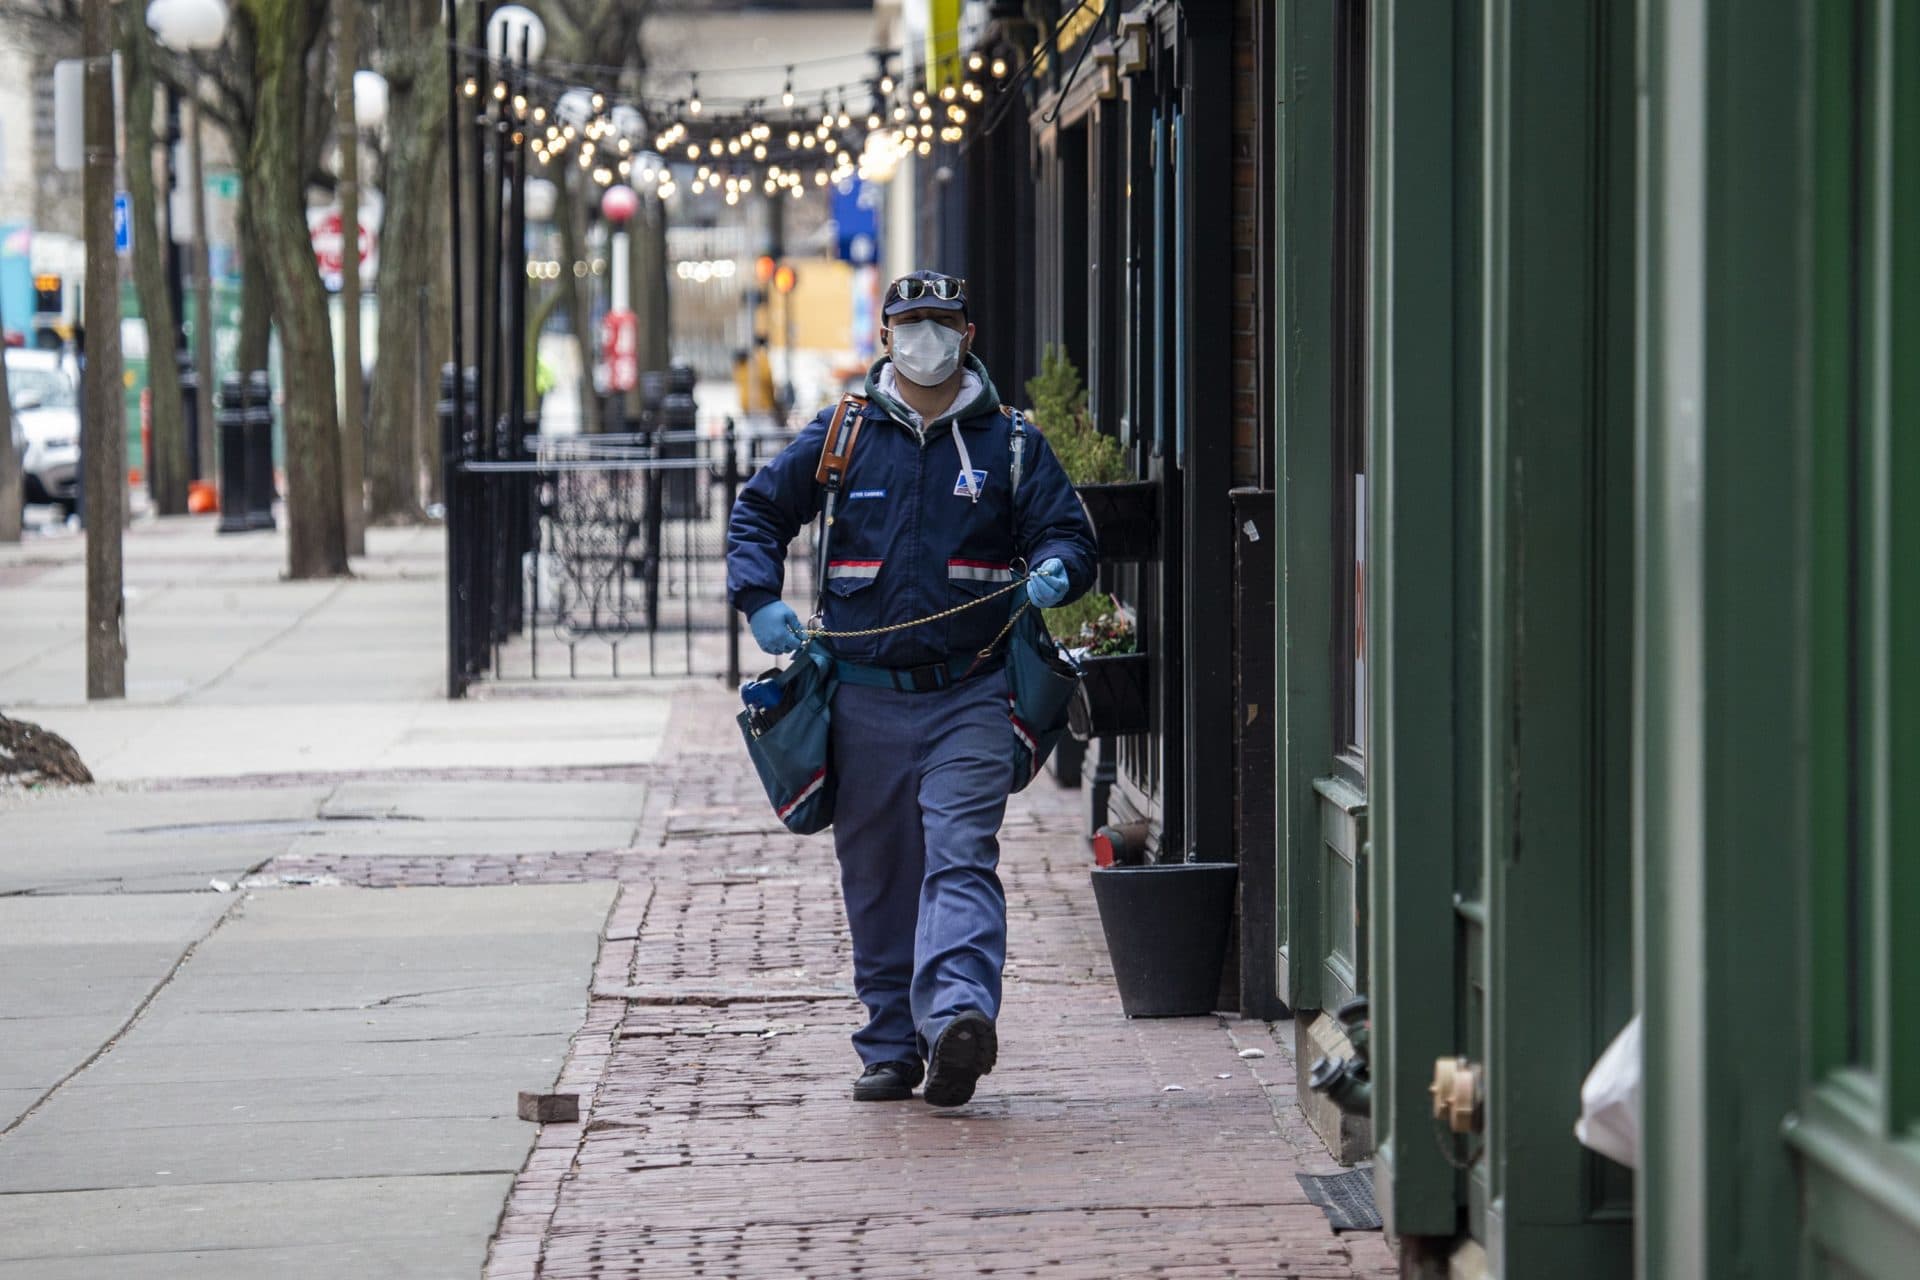 March 23: A U.S. postal mail carrier with a mask delivers mail on Canal Street by North Station. (Jesse Costa/WBUR)